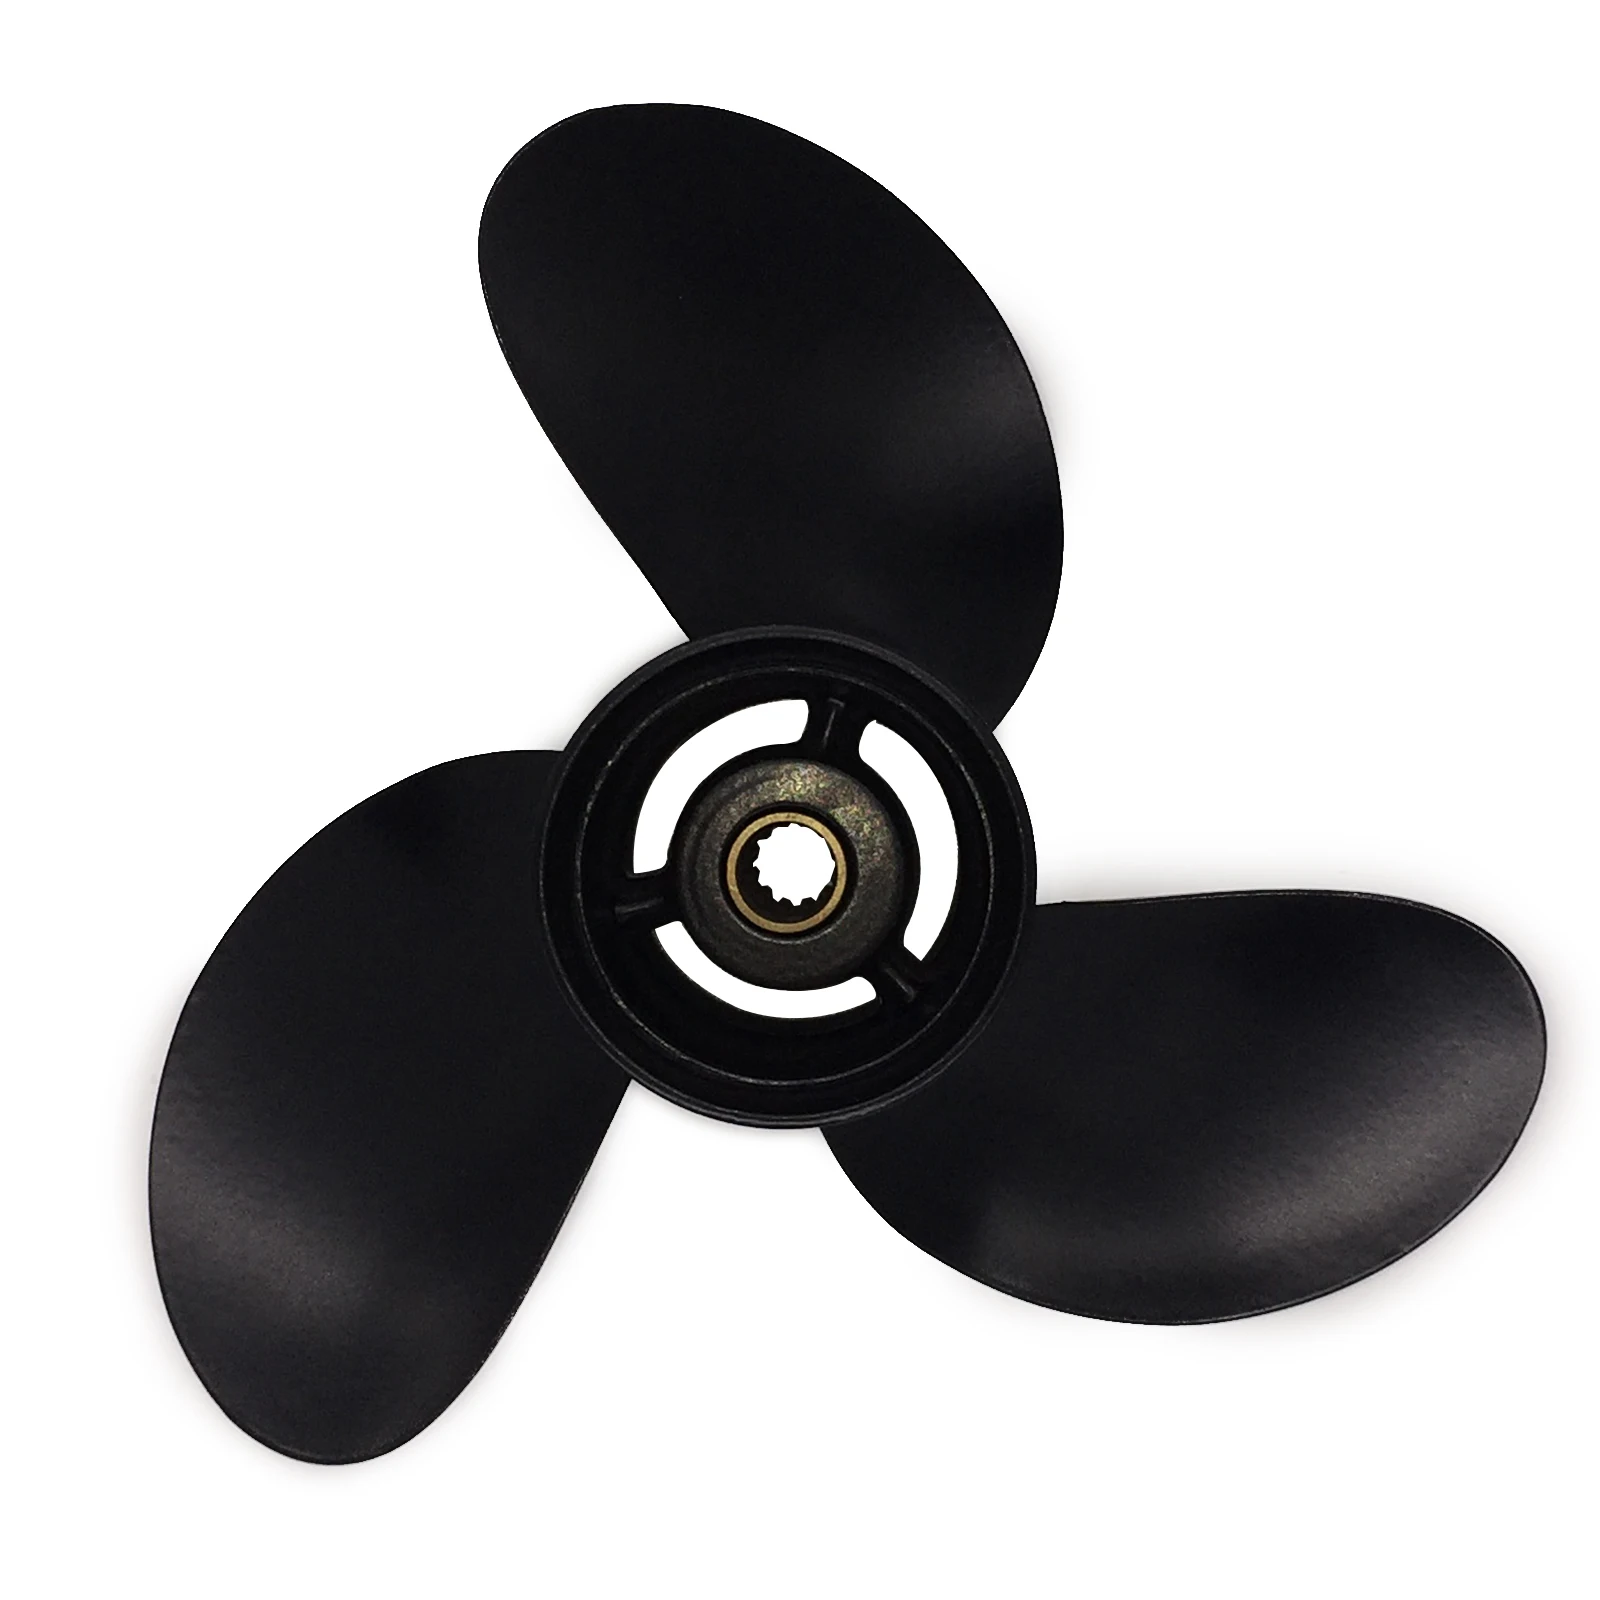 Boat Propeller 9.5x8 Fit for Tohatsu Outboard 9.8HP-18HP 3 Blades Aluminum Prop 14 Tooth Propel RH OEM NO: 3BAB64516-1 9.5x8